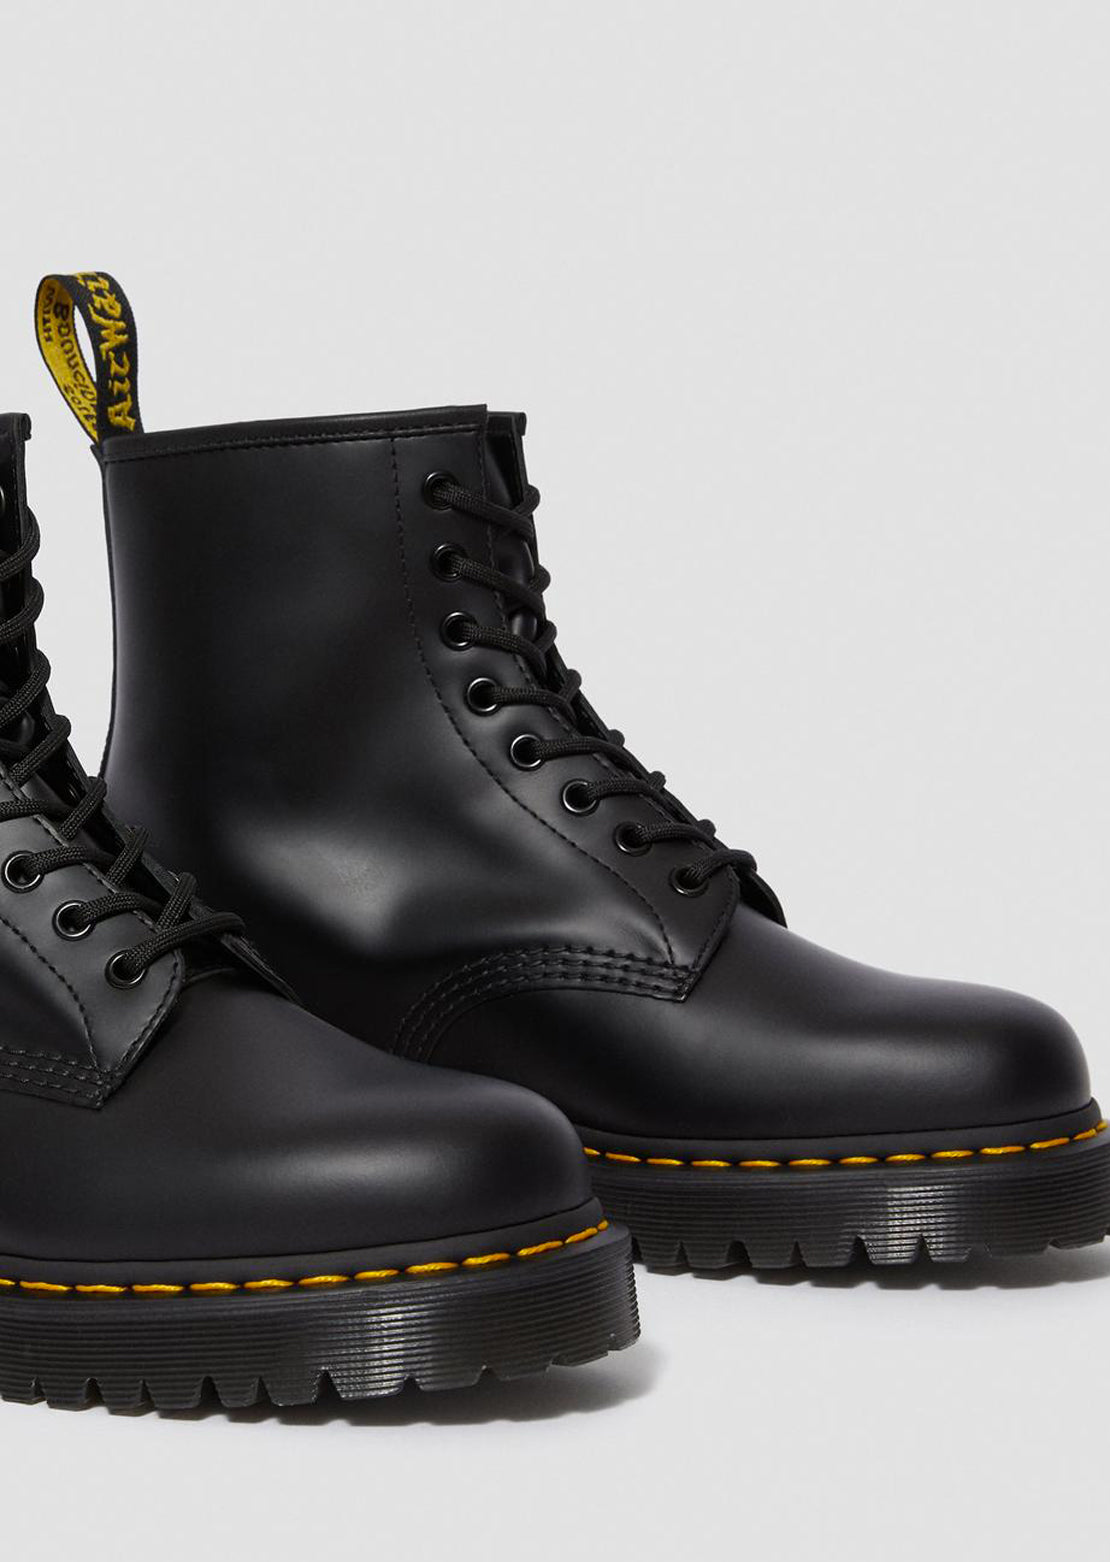 Dr.Martens Women’s 1460 Bex Boots Black Smooth